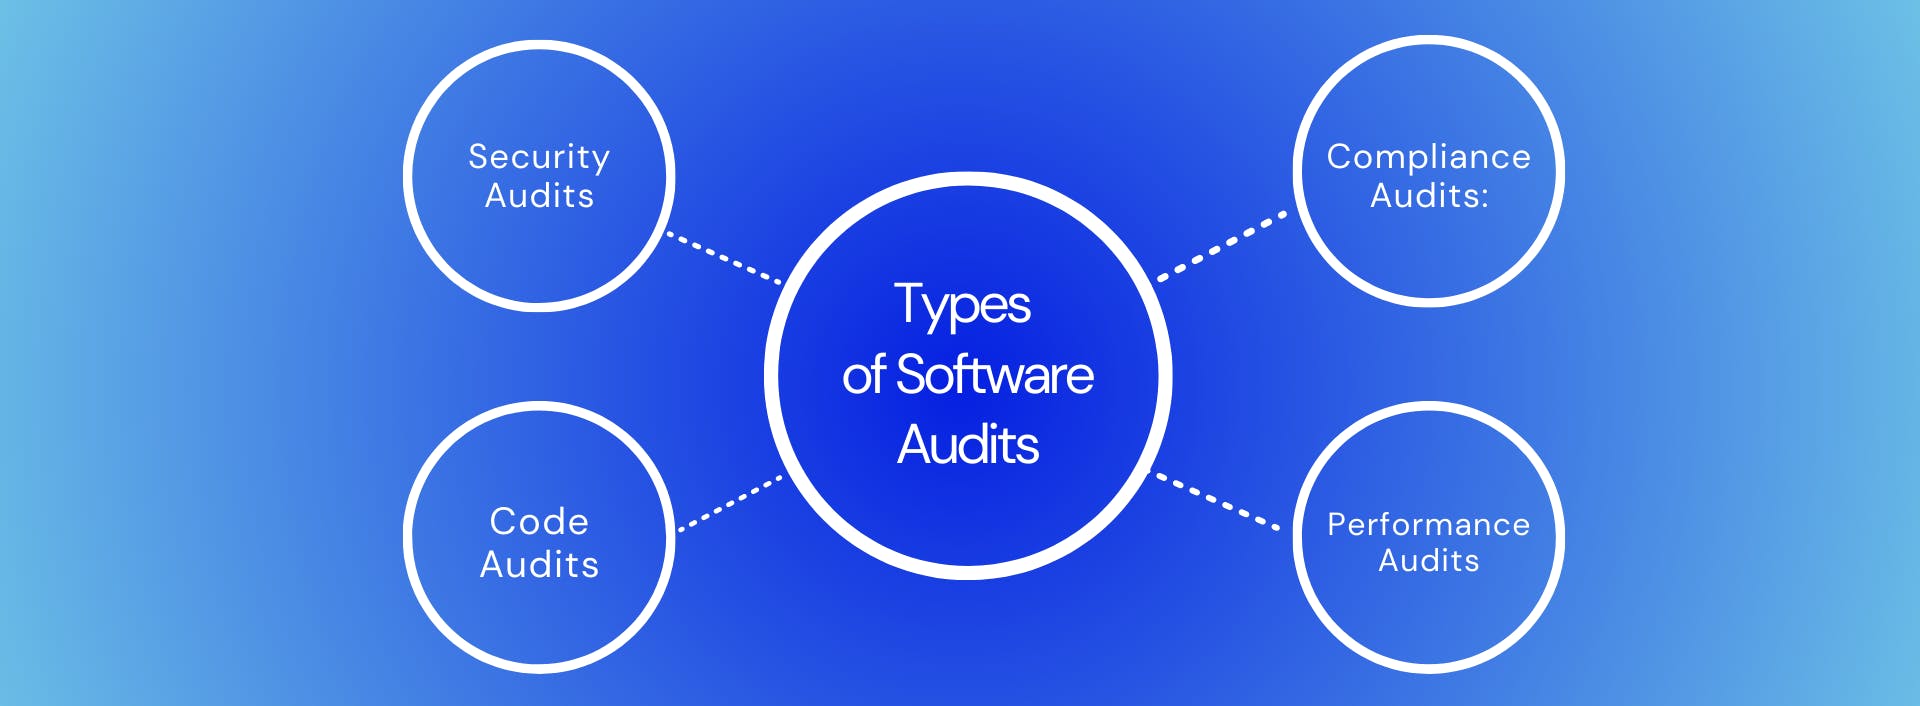 Types of software audits